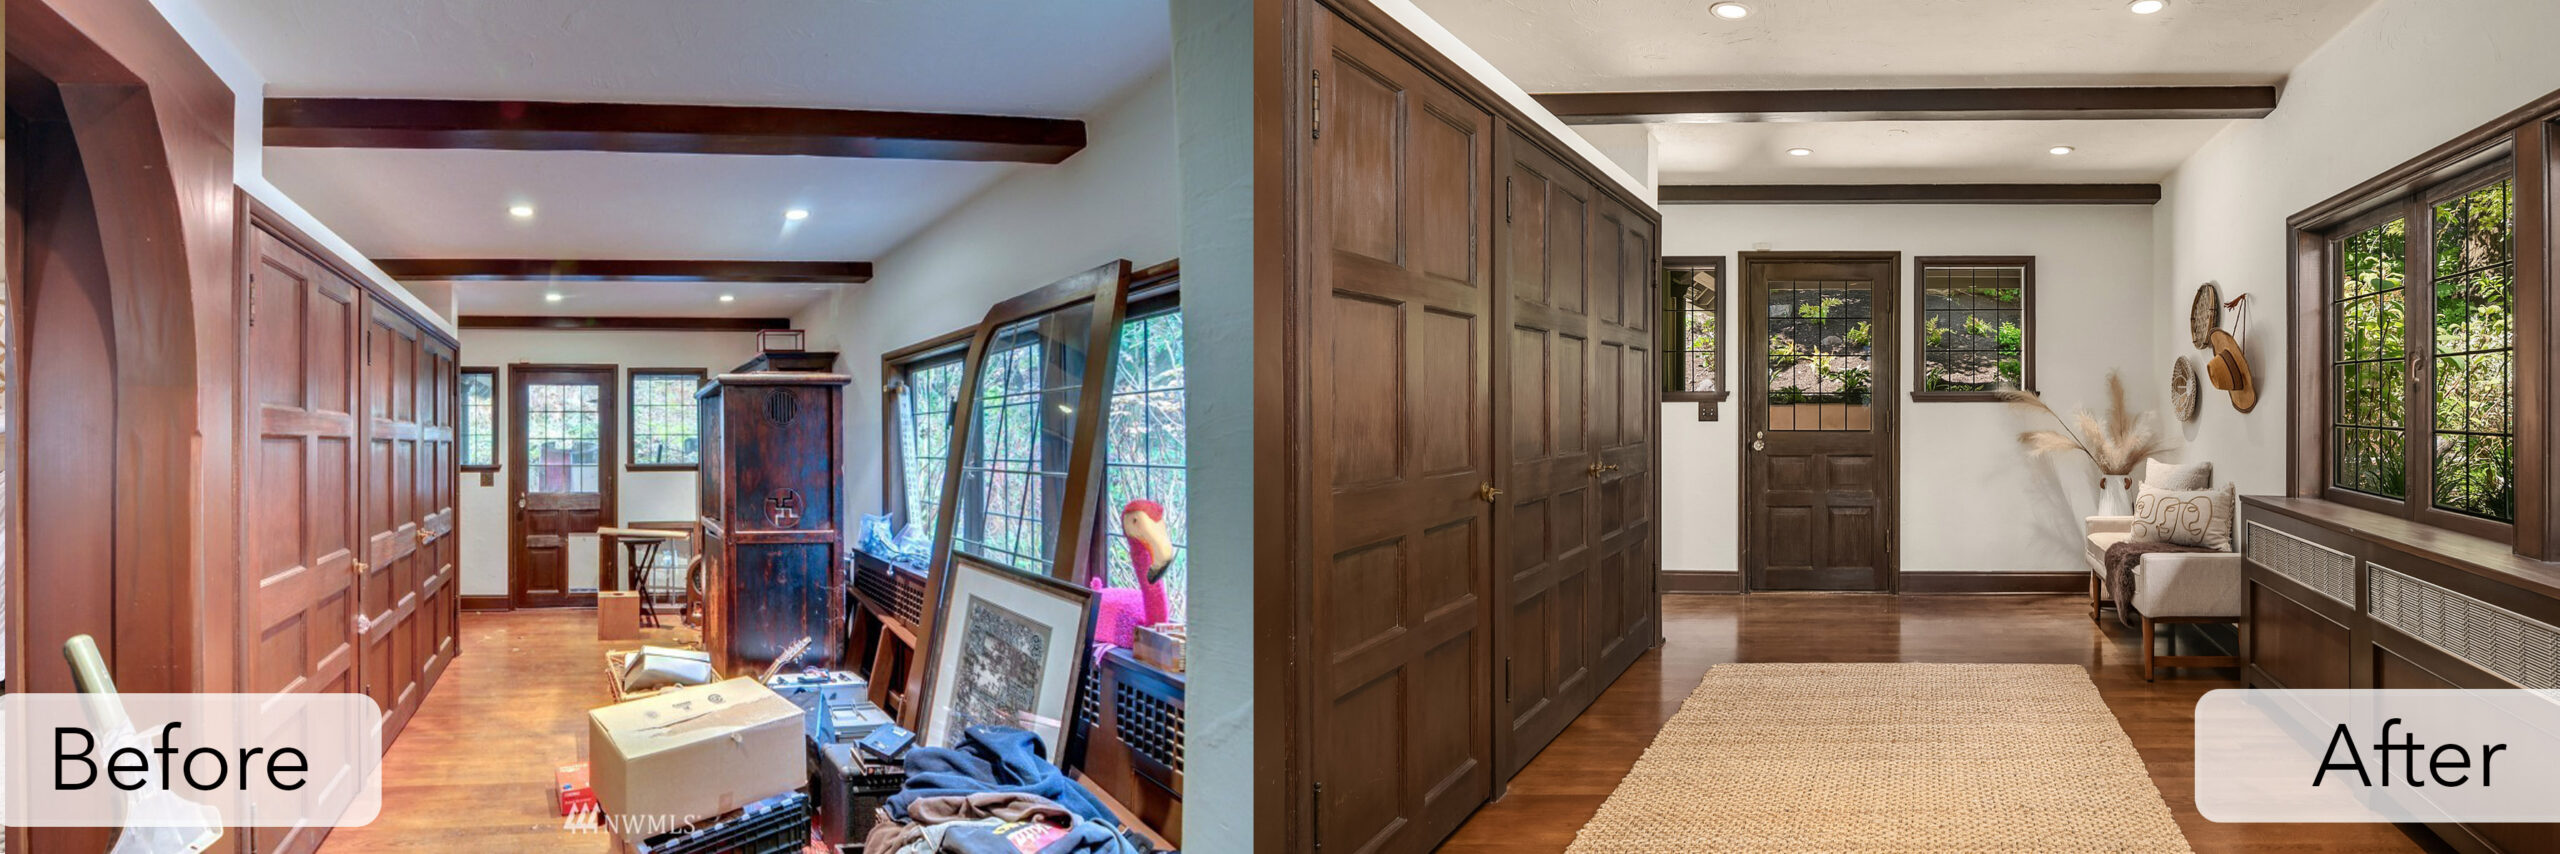 luxury mercer island home mudroom before and after